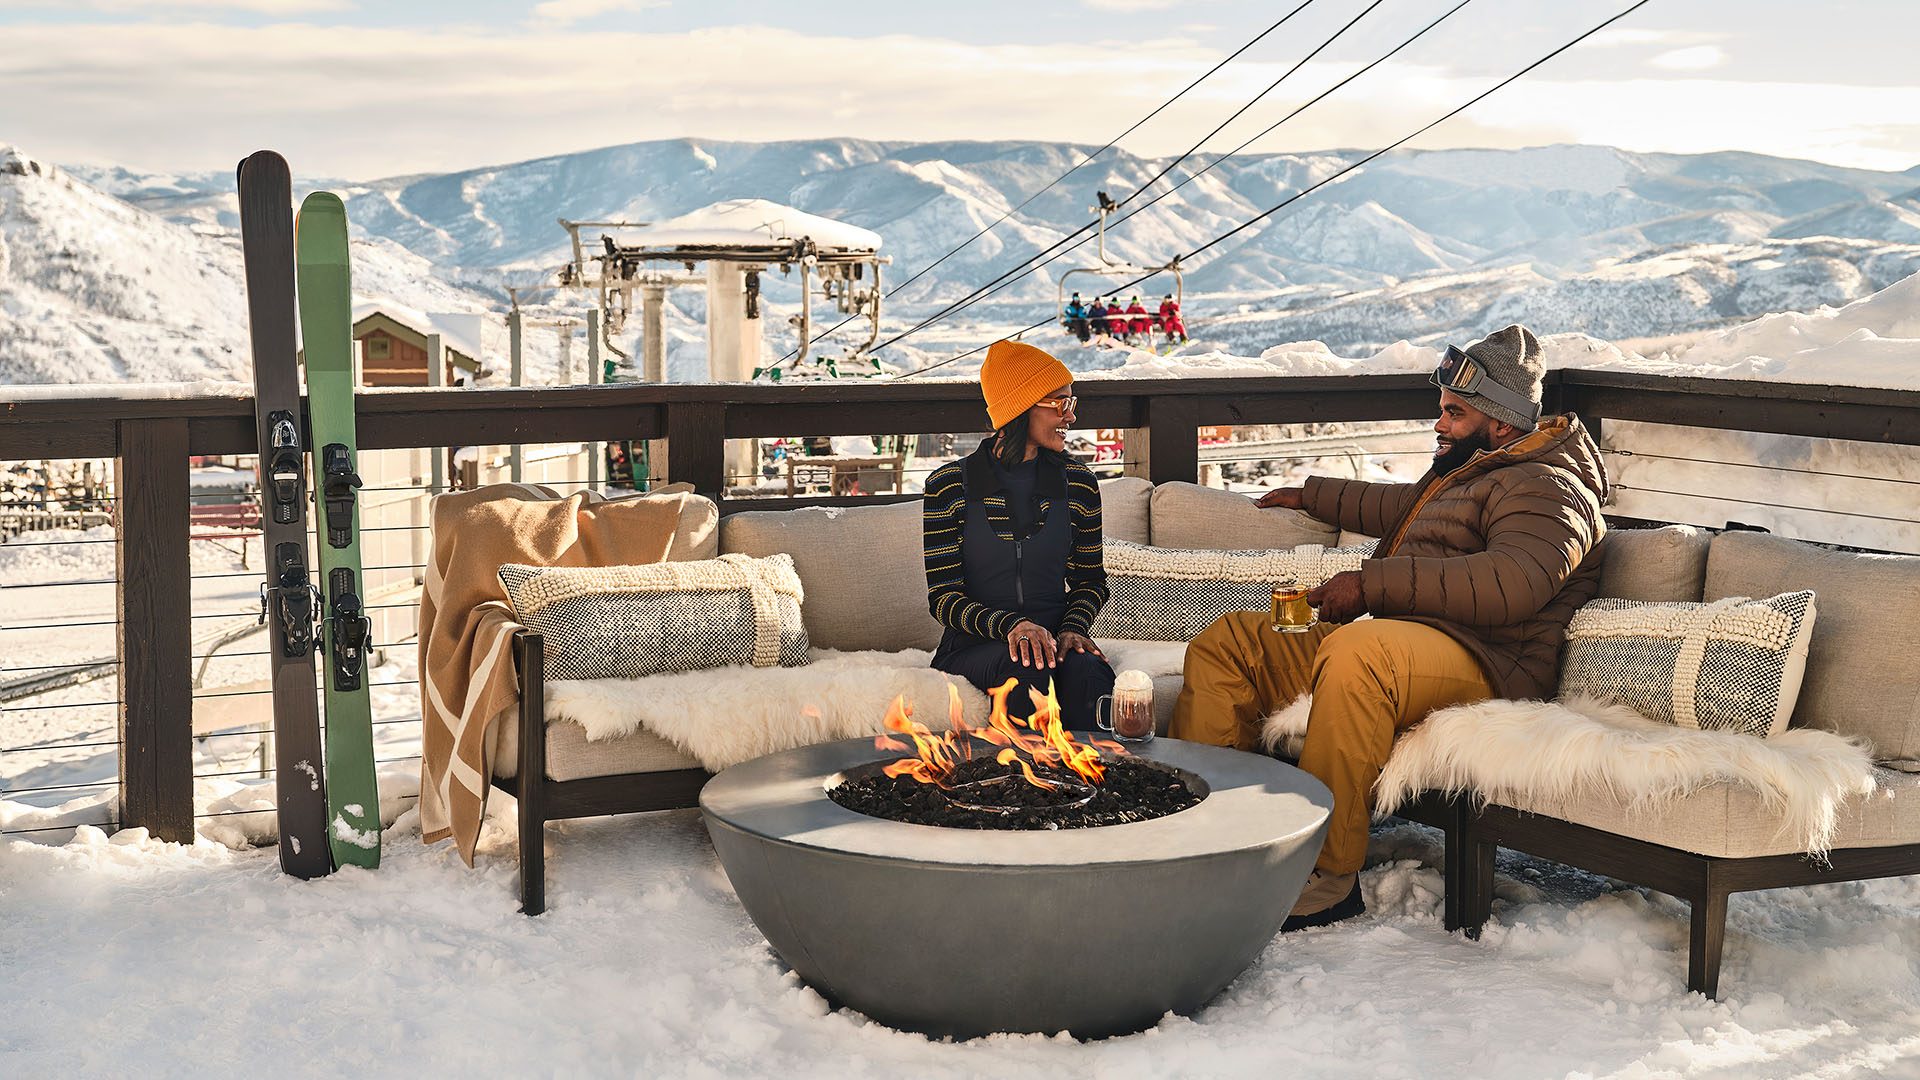 Two people sit around a fire pit on a deck in a snowy destination